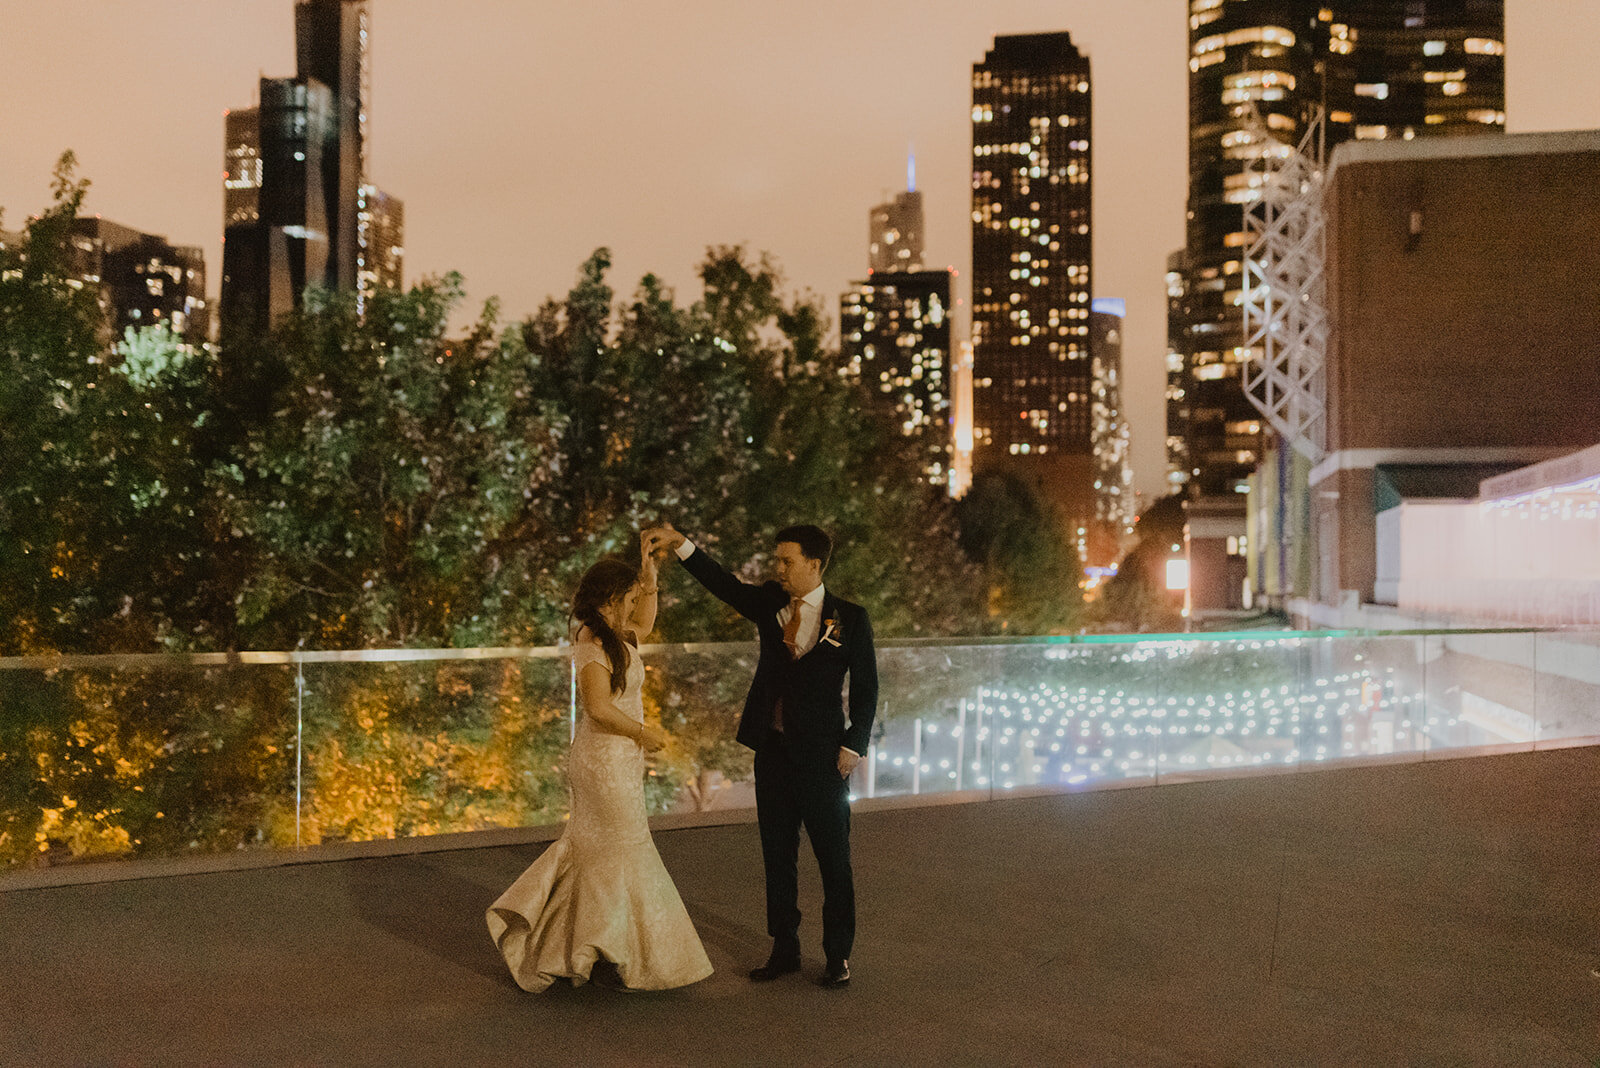 Stylish Crystal Ballroom Wedding captured by Steph Masat Photography on CHI thee WED